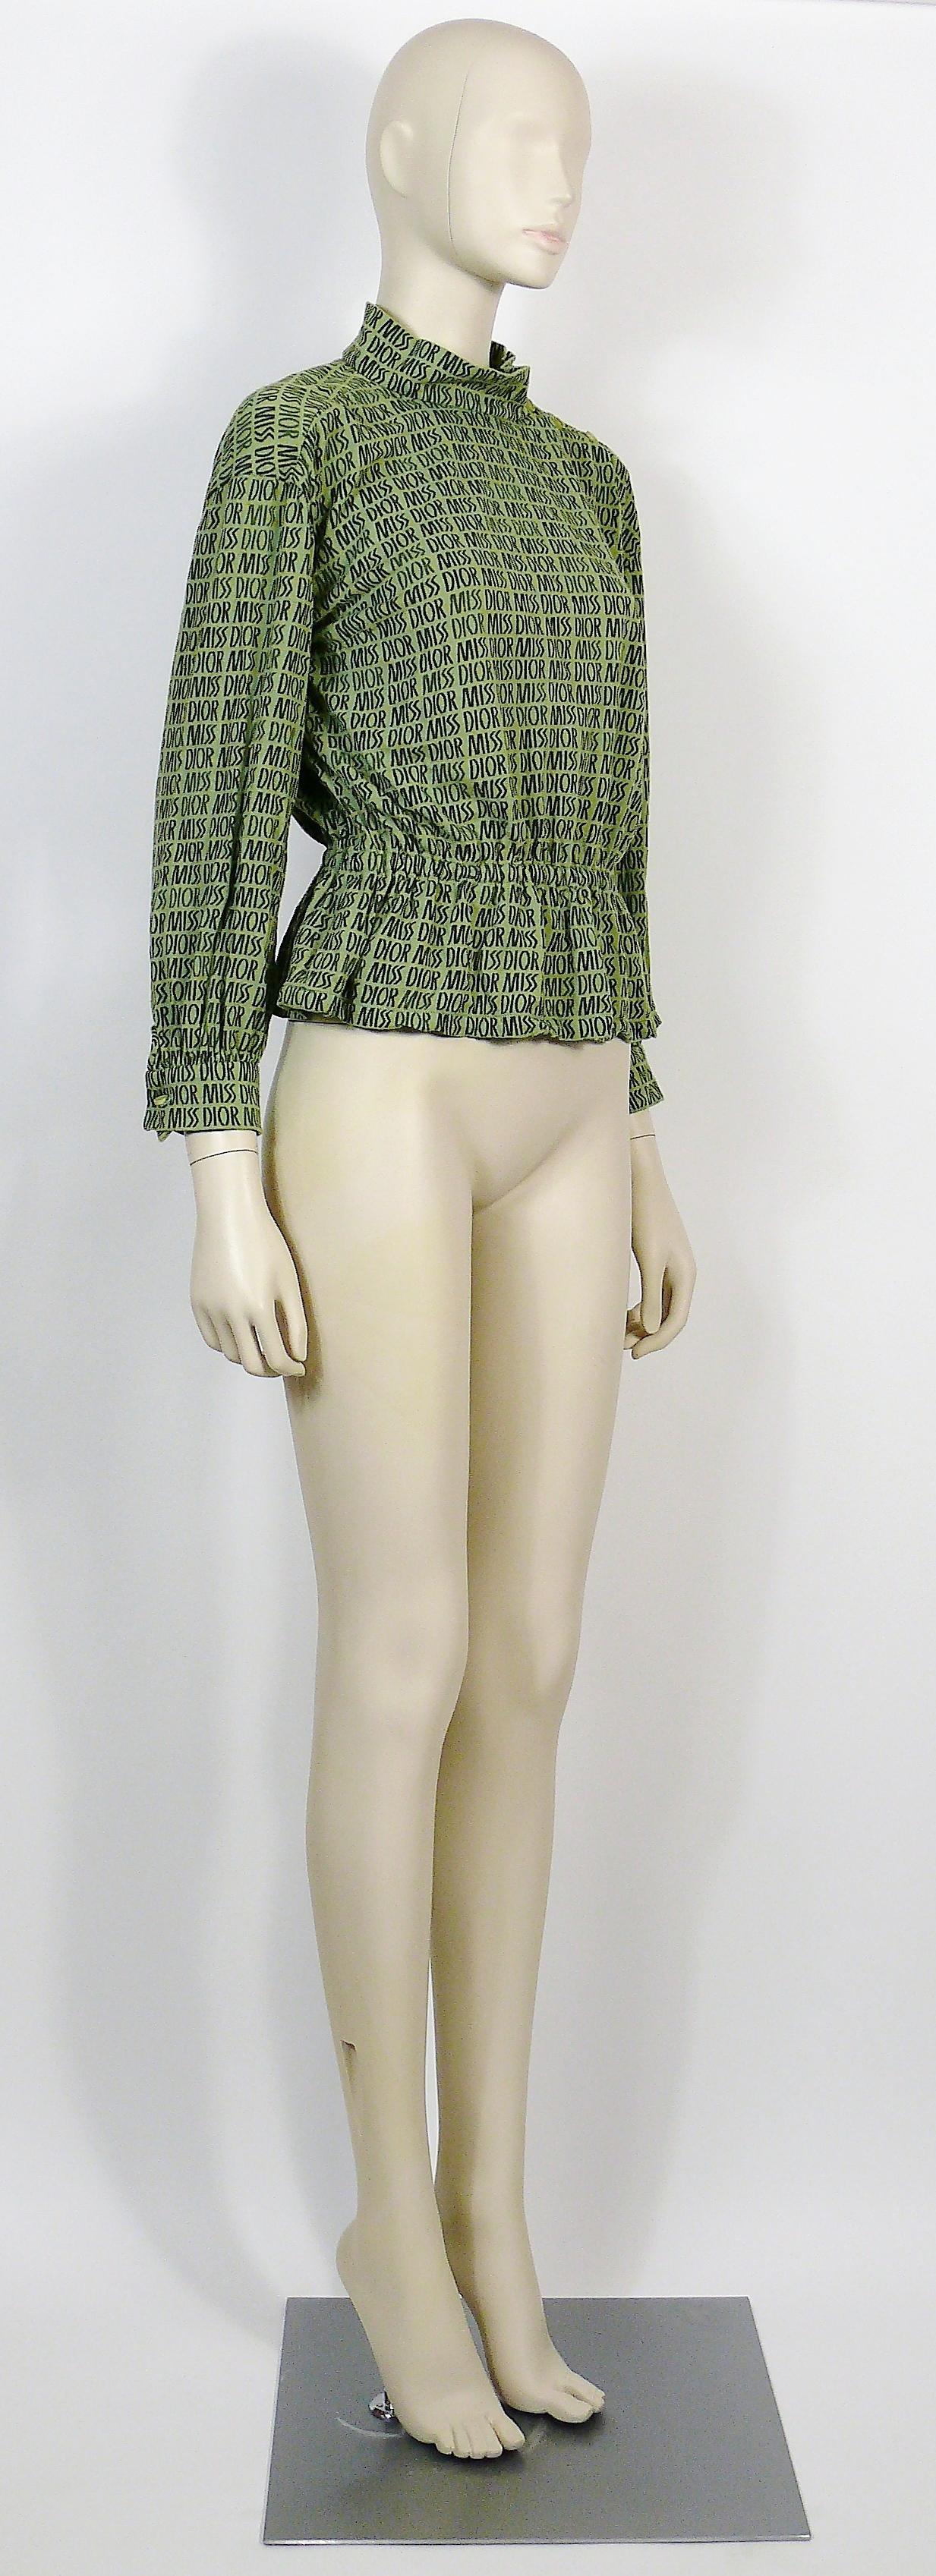 MISS DIOR vintage rare green blouse featuring MISS DIOR logos all over.

This blouse features :
- Sretchy fabric (unidentified composition).
- Mock neck with side buttoning.
- Button closure on each cuff.
- Peplum elastic waist.
- Long